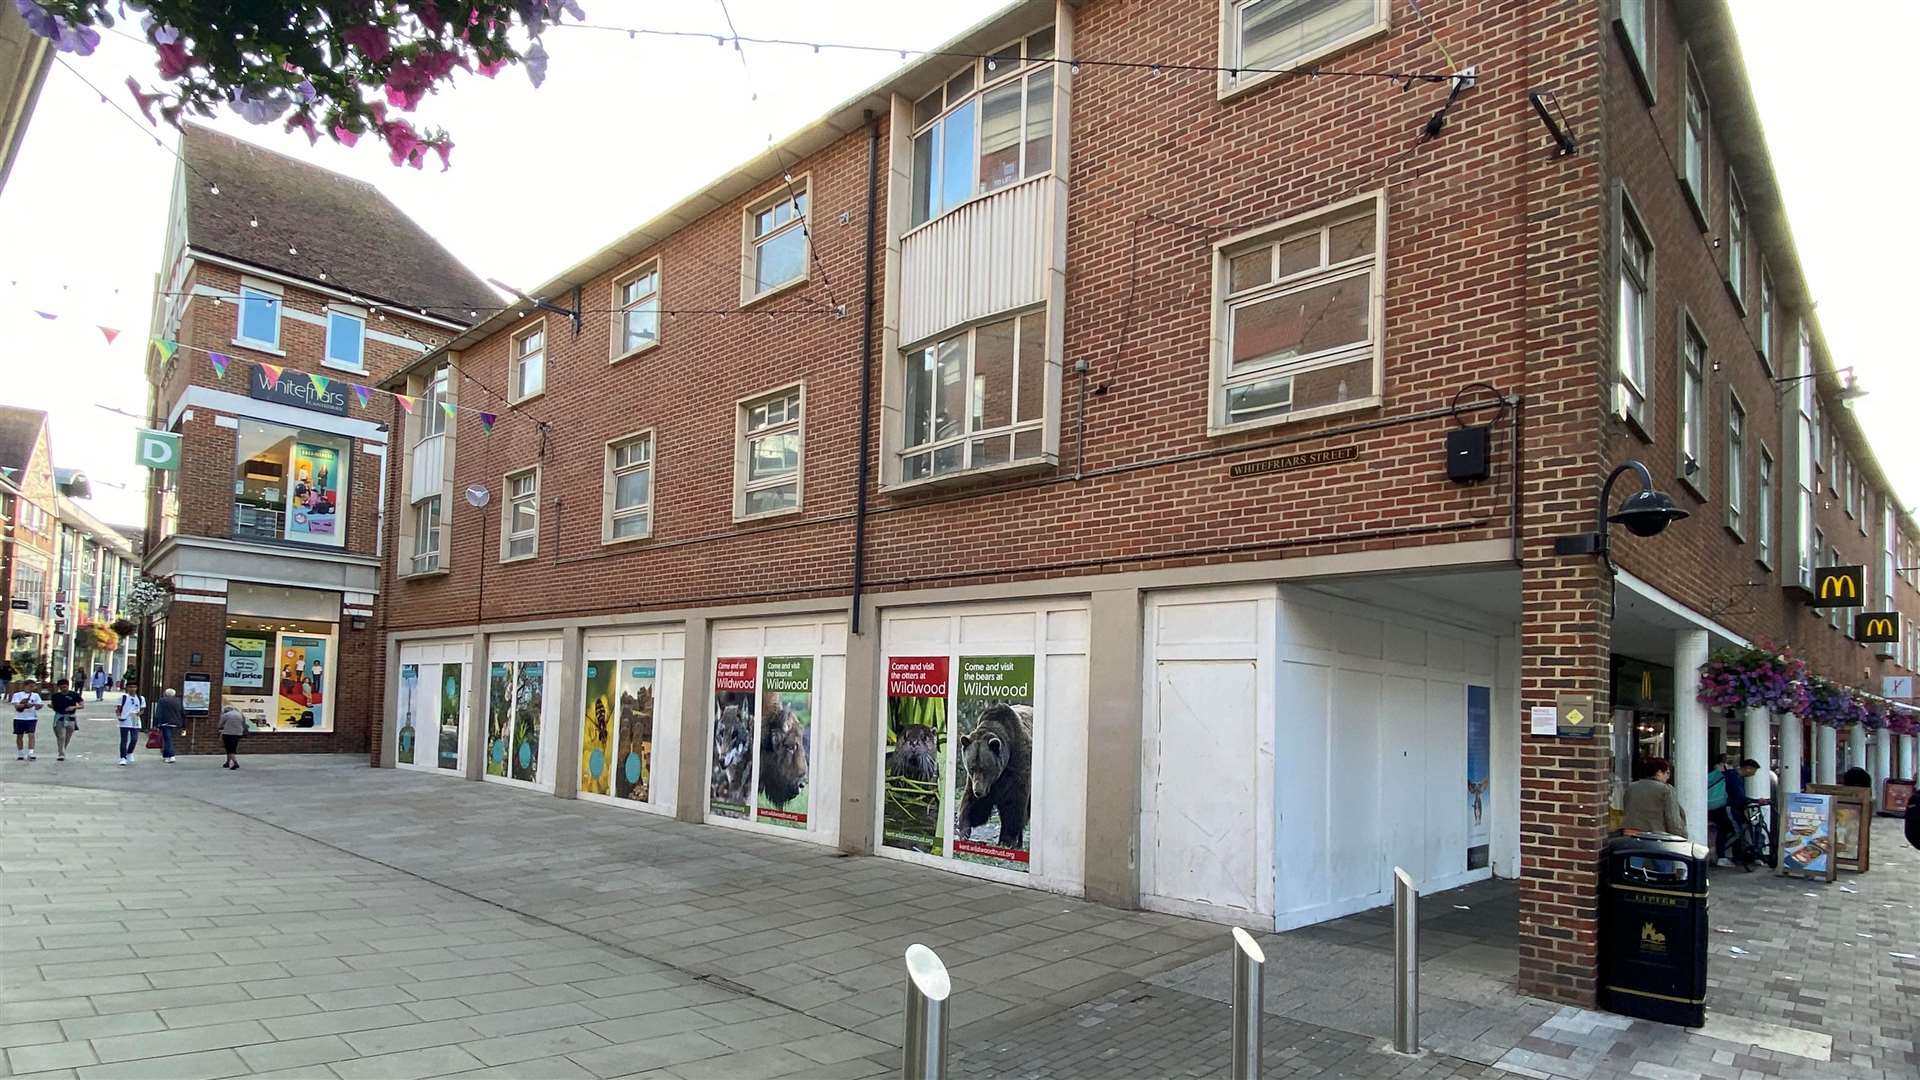 The old Beaverbrooks site in Canterbury has finally found new tenants